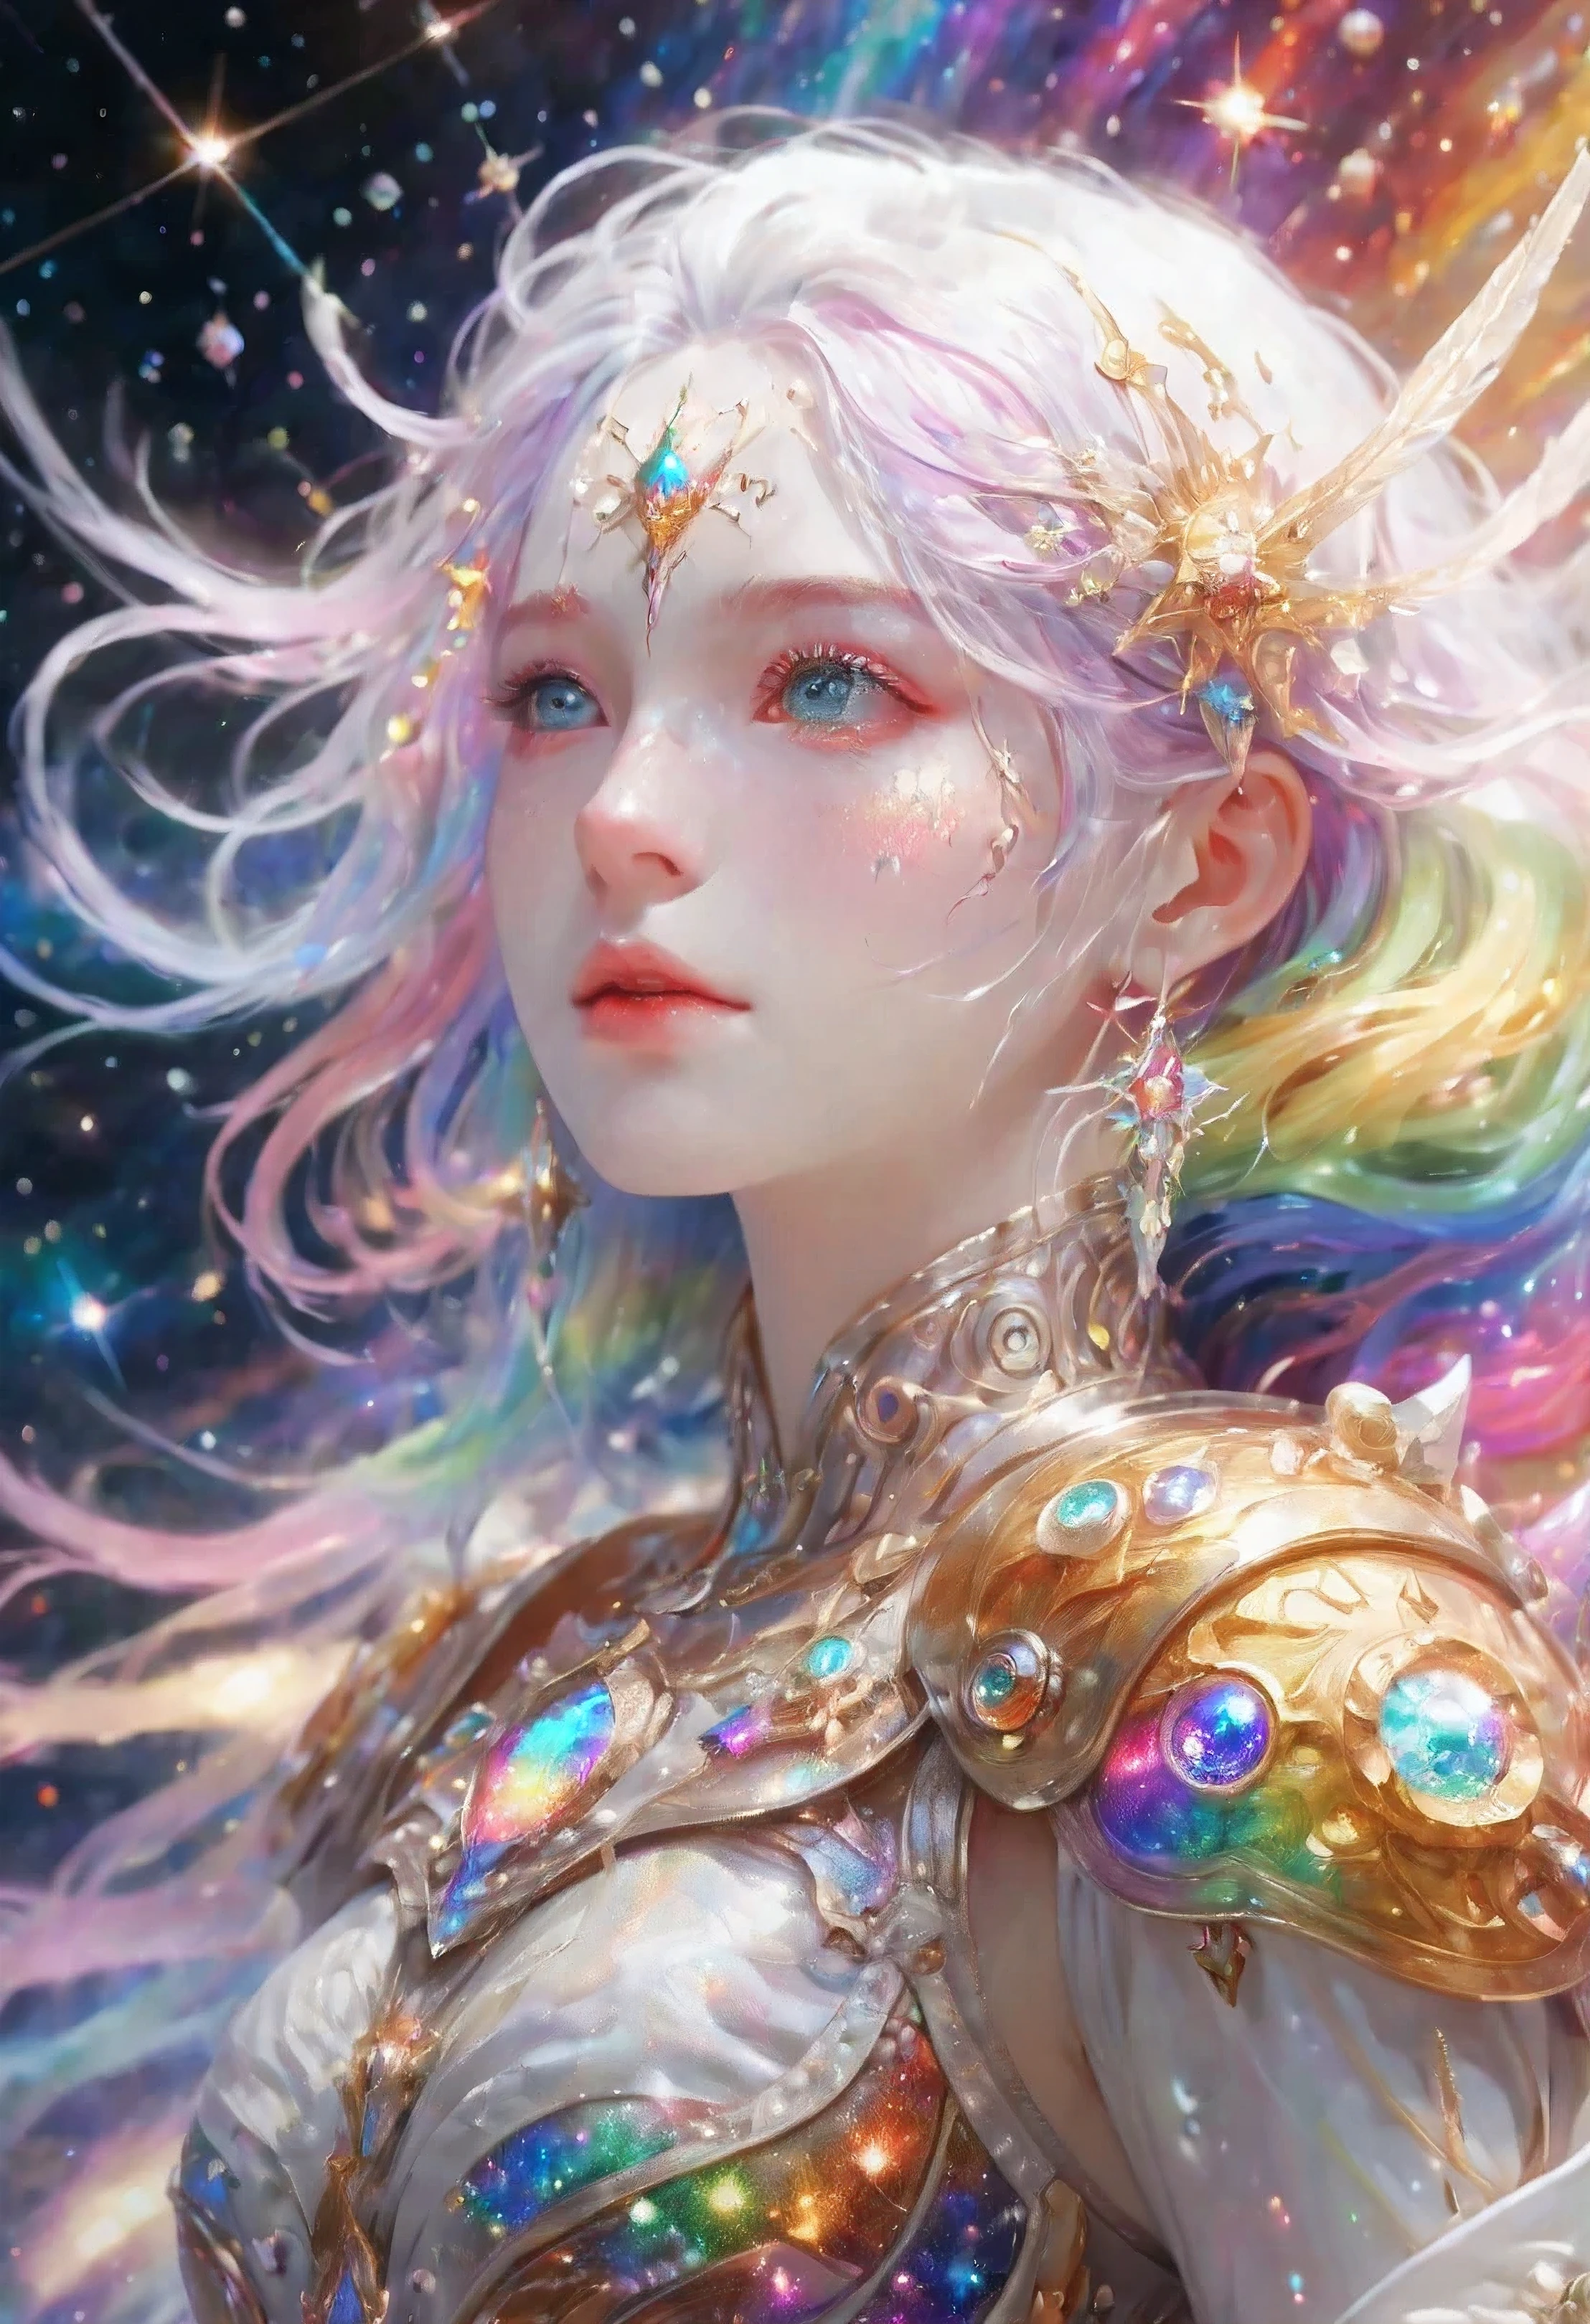 1 girl, rainbow colored hair,White exquisite armor, Rainbow colored cosmic nebula background, star, galaxy, intricate details, White skin,masterpiece, best quality, current, Floating happily in space, luminescent, luminescent